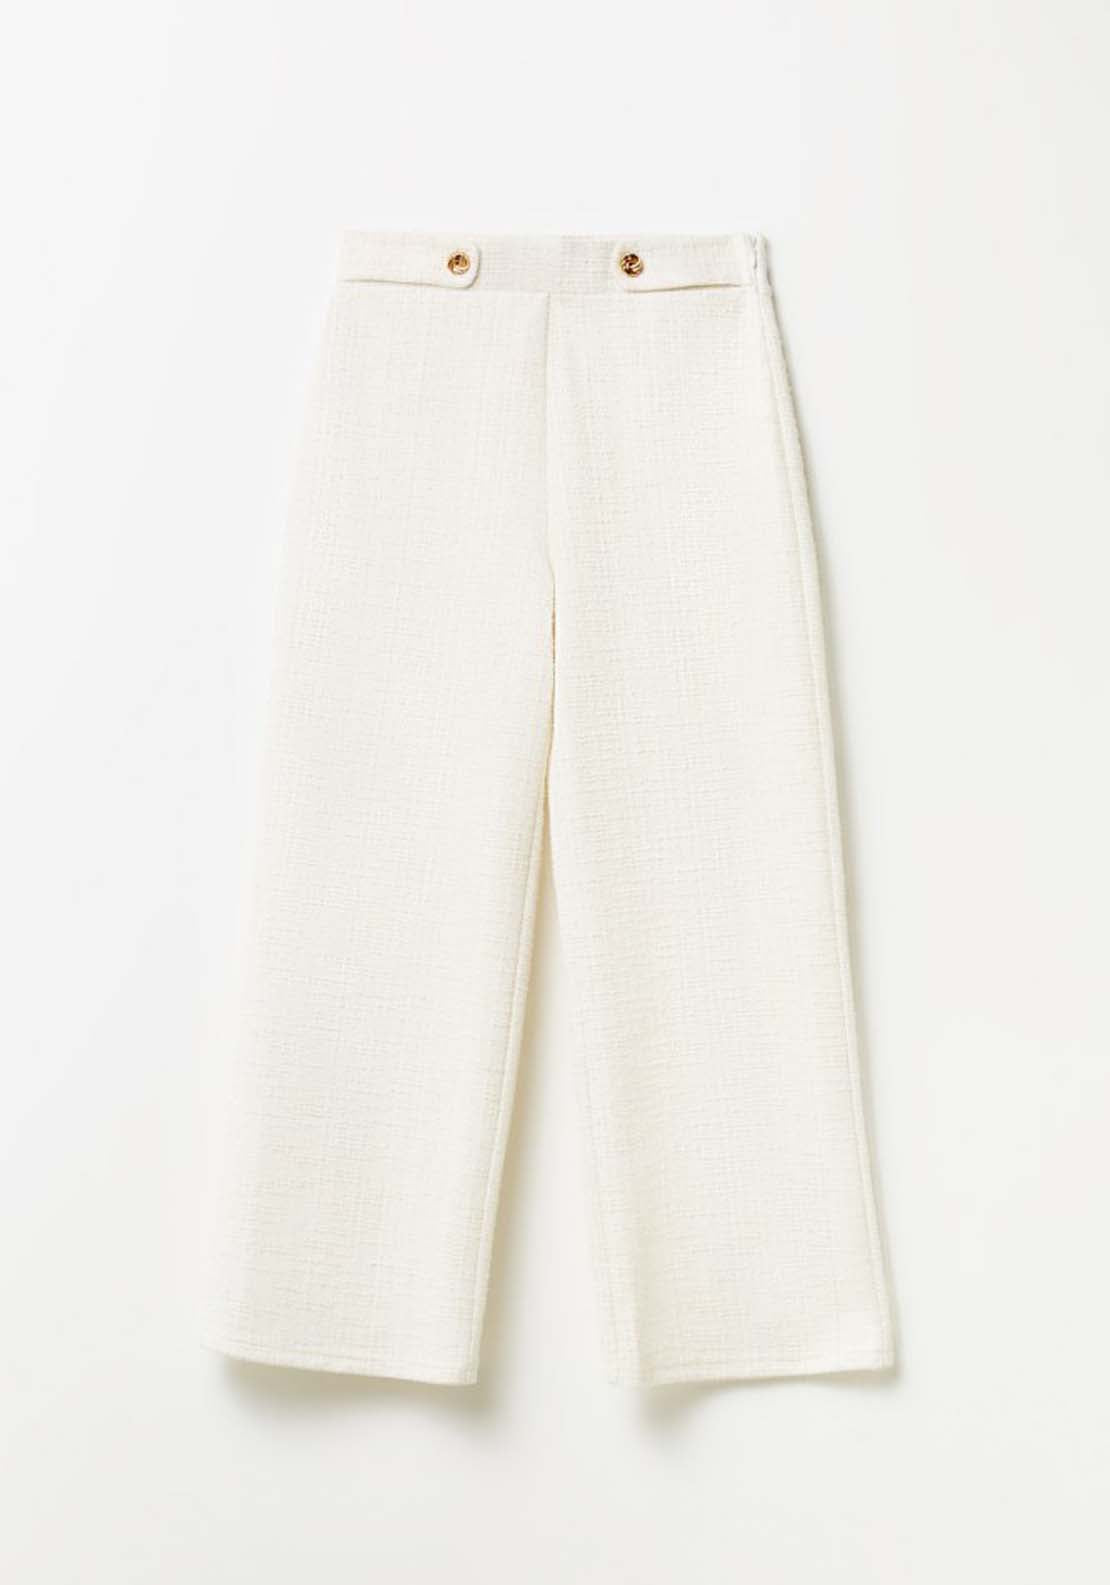 Sfera Textured Wide Leg Trousers 7 Shaws Department Stores